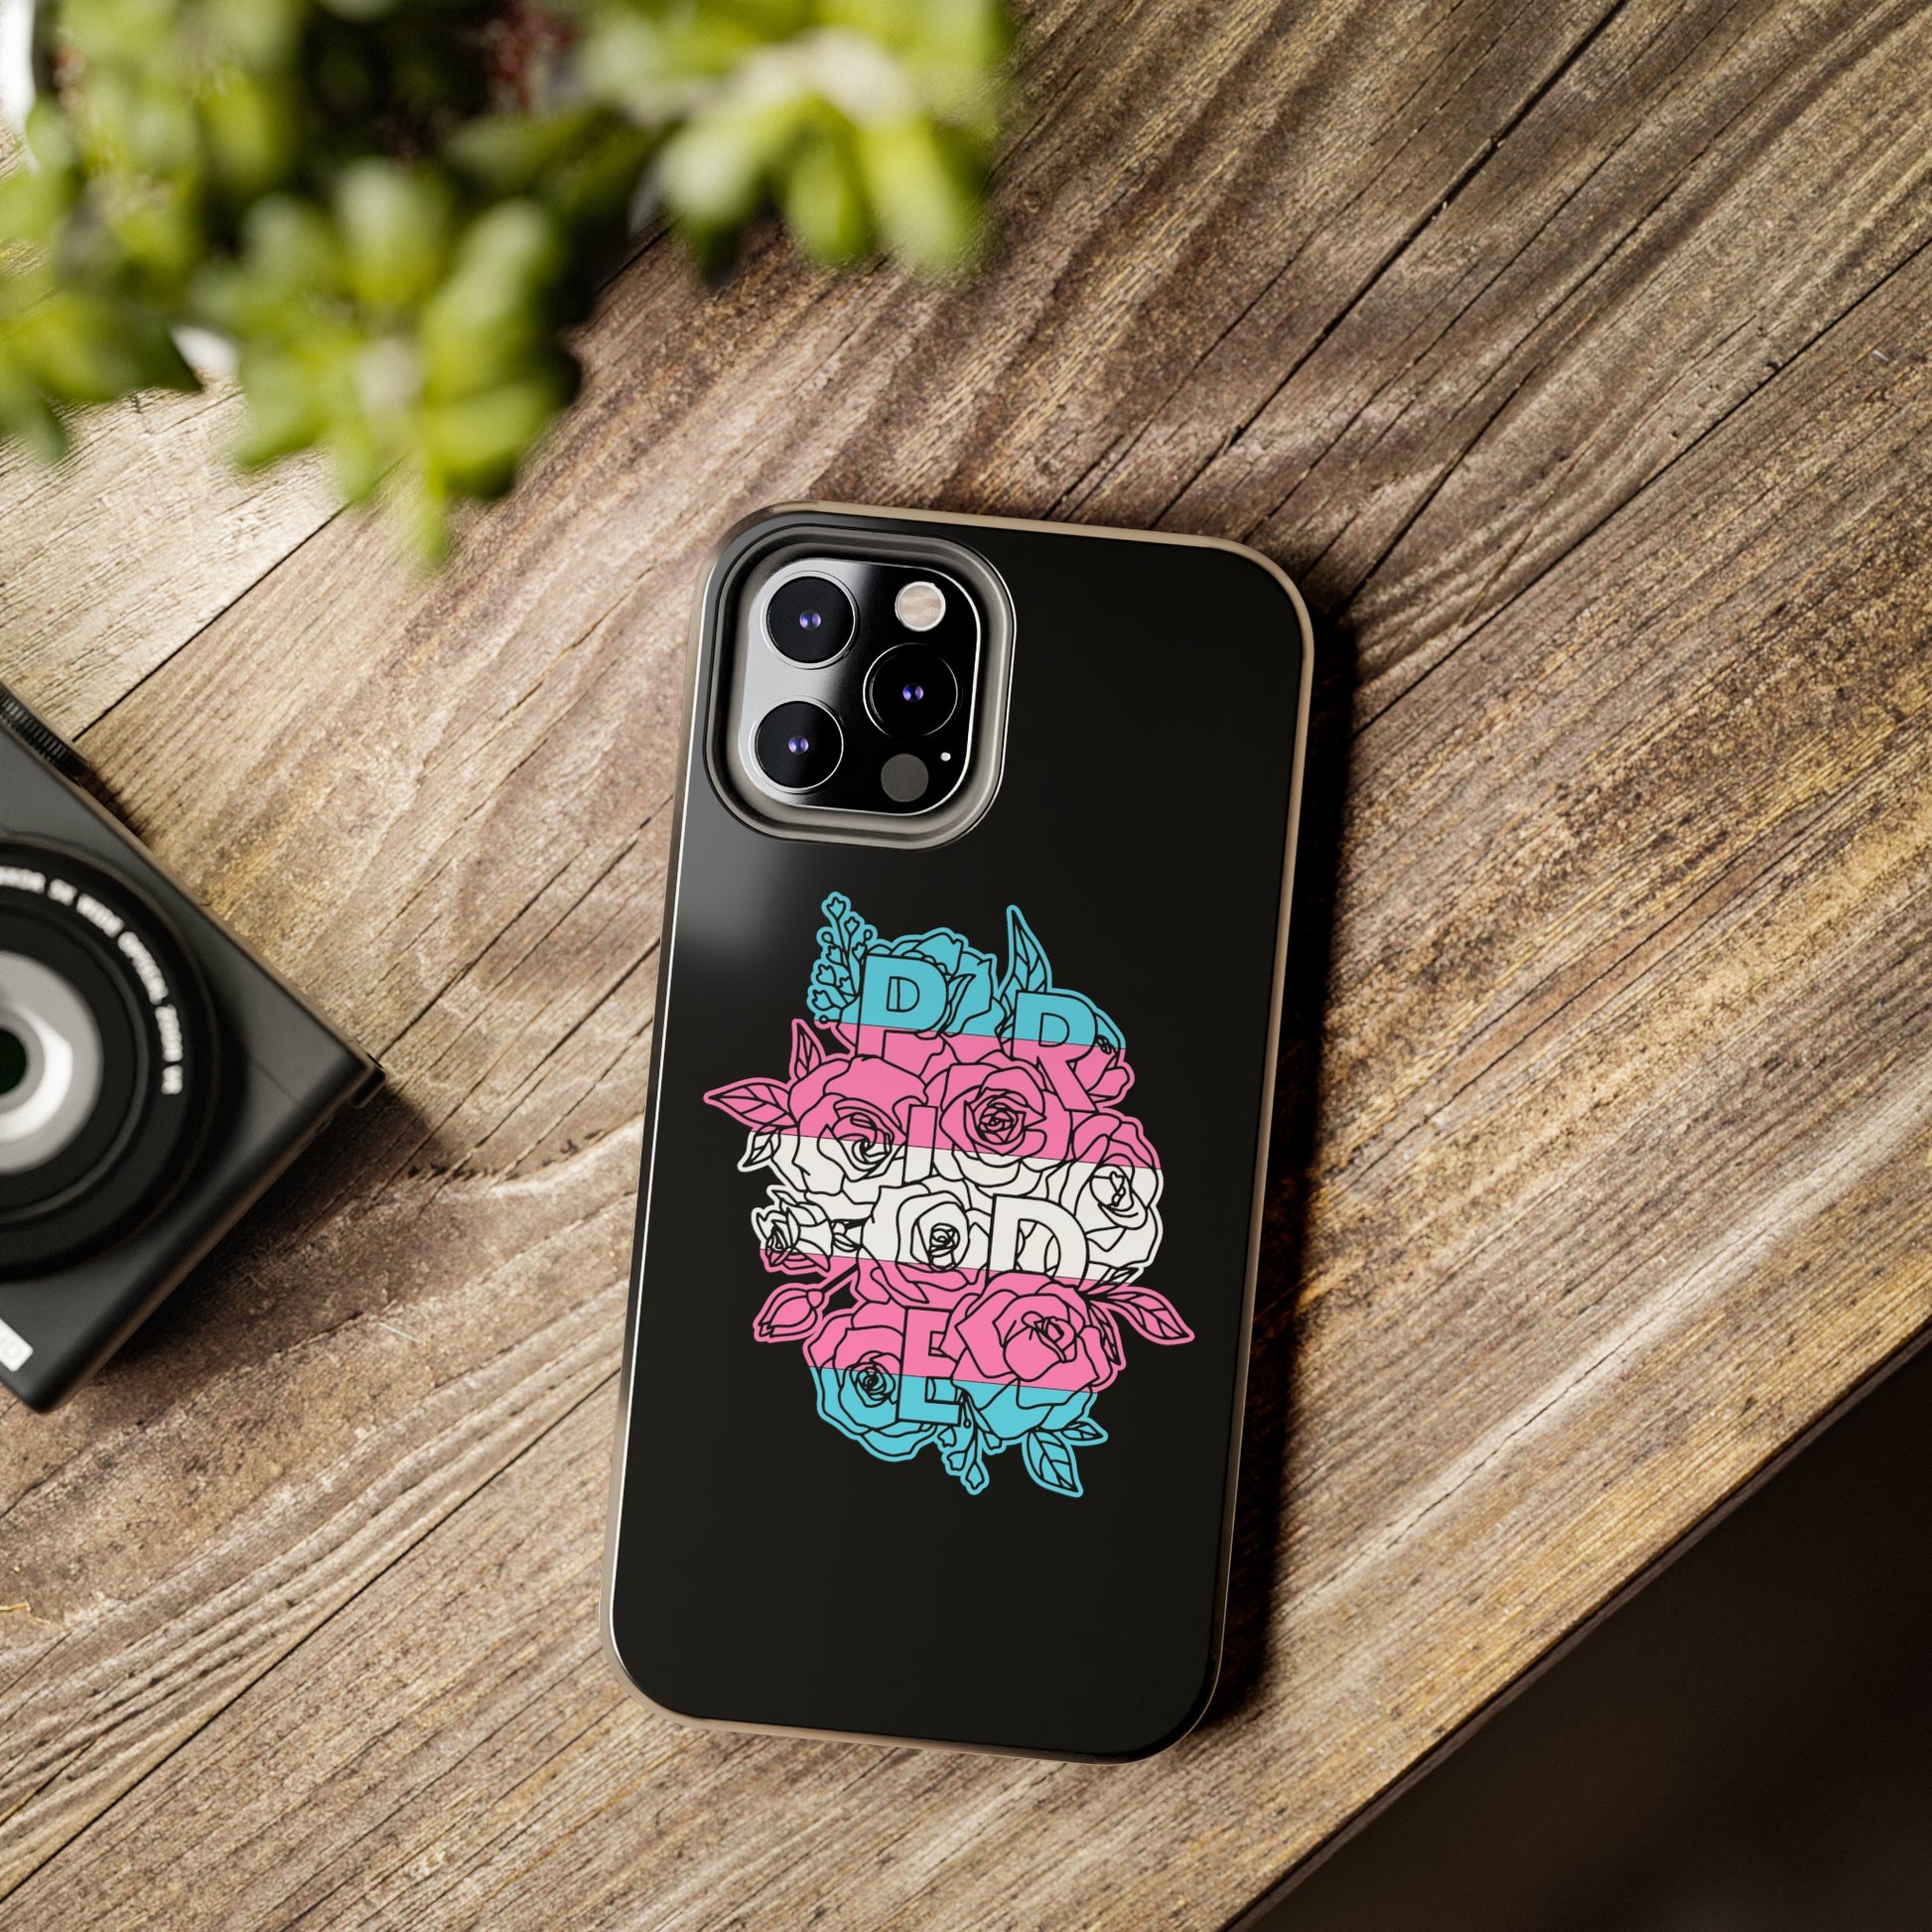 Trans Pride iPhone Case - Equality Trading Post 